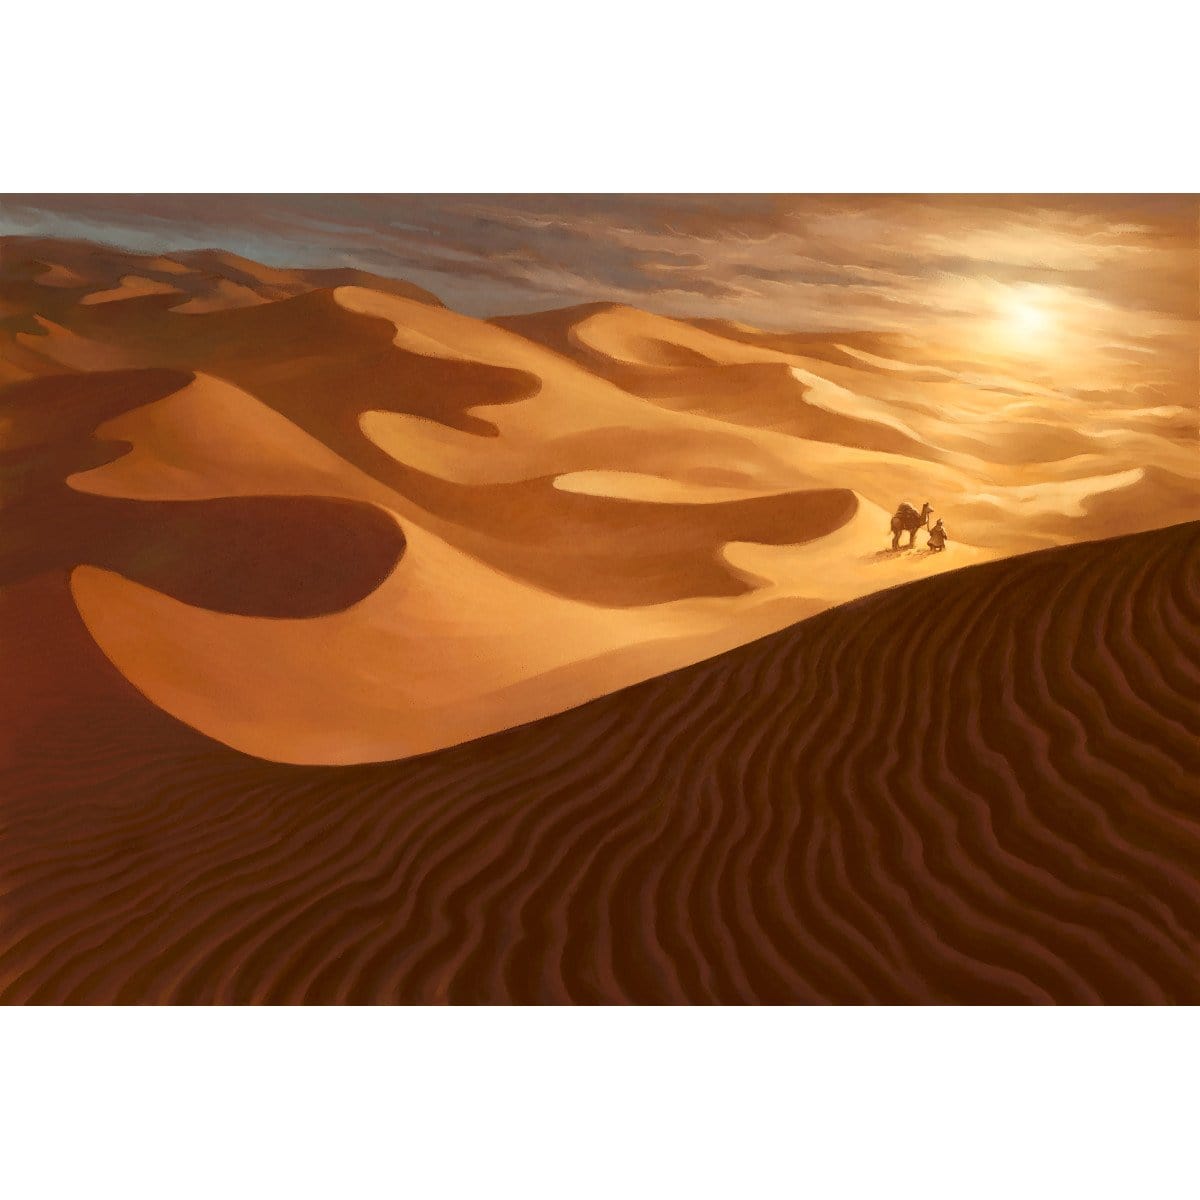 Sea of Sand Print - Print - Original Magic Art - Accessories for Magic the Gathering and other card games